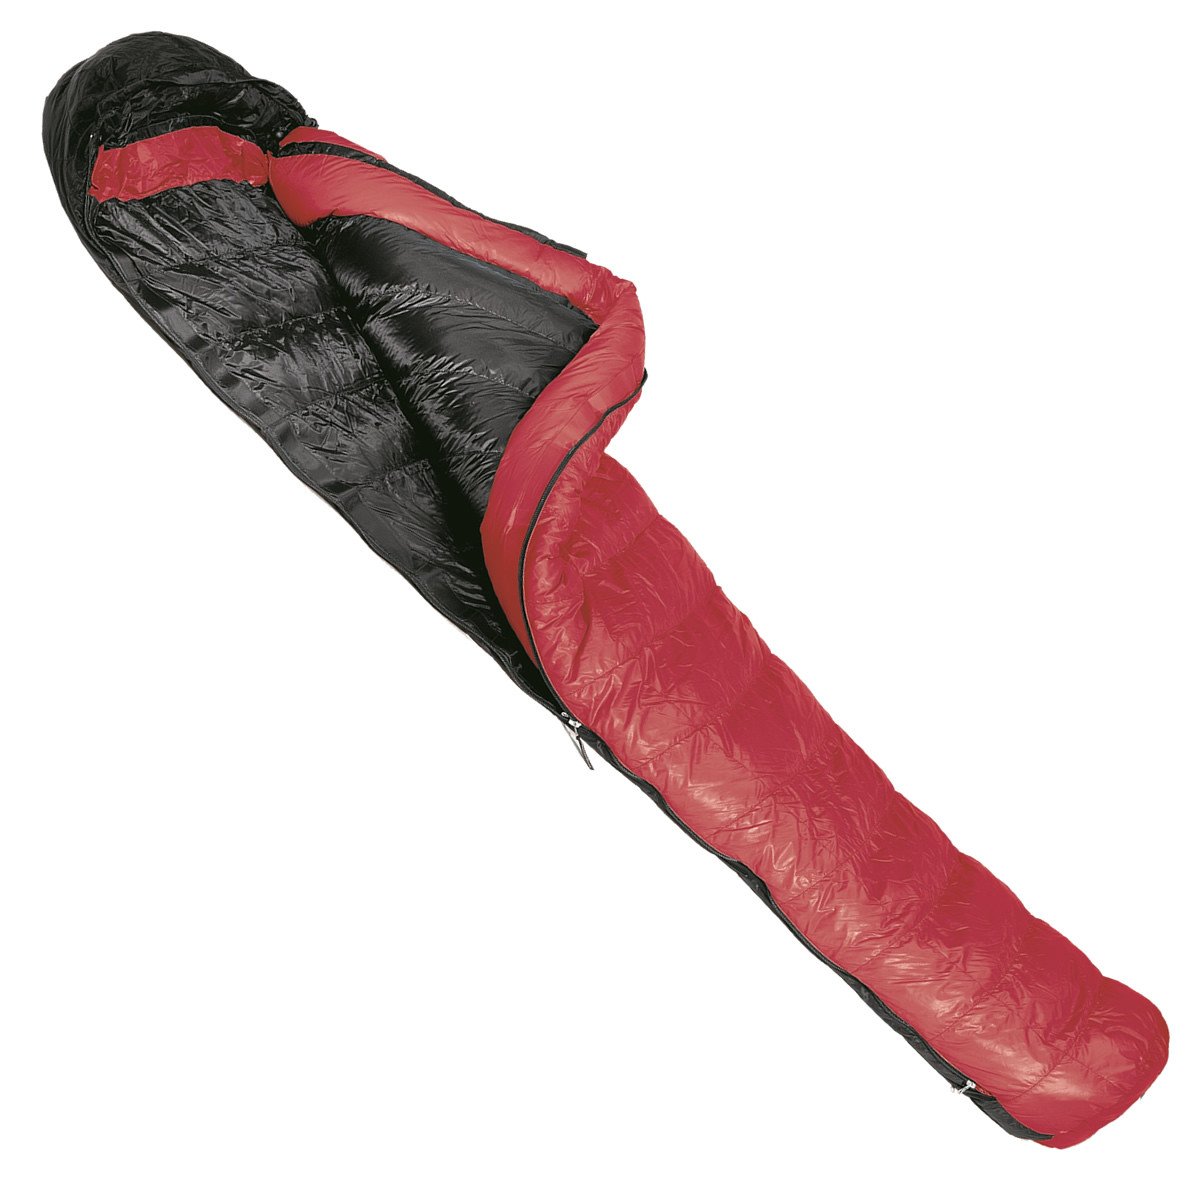 Western Mountaineering Summerlite down sleeping bag, shown partially open in red with a black lining